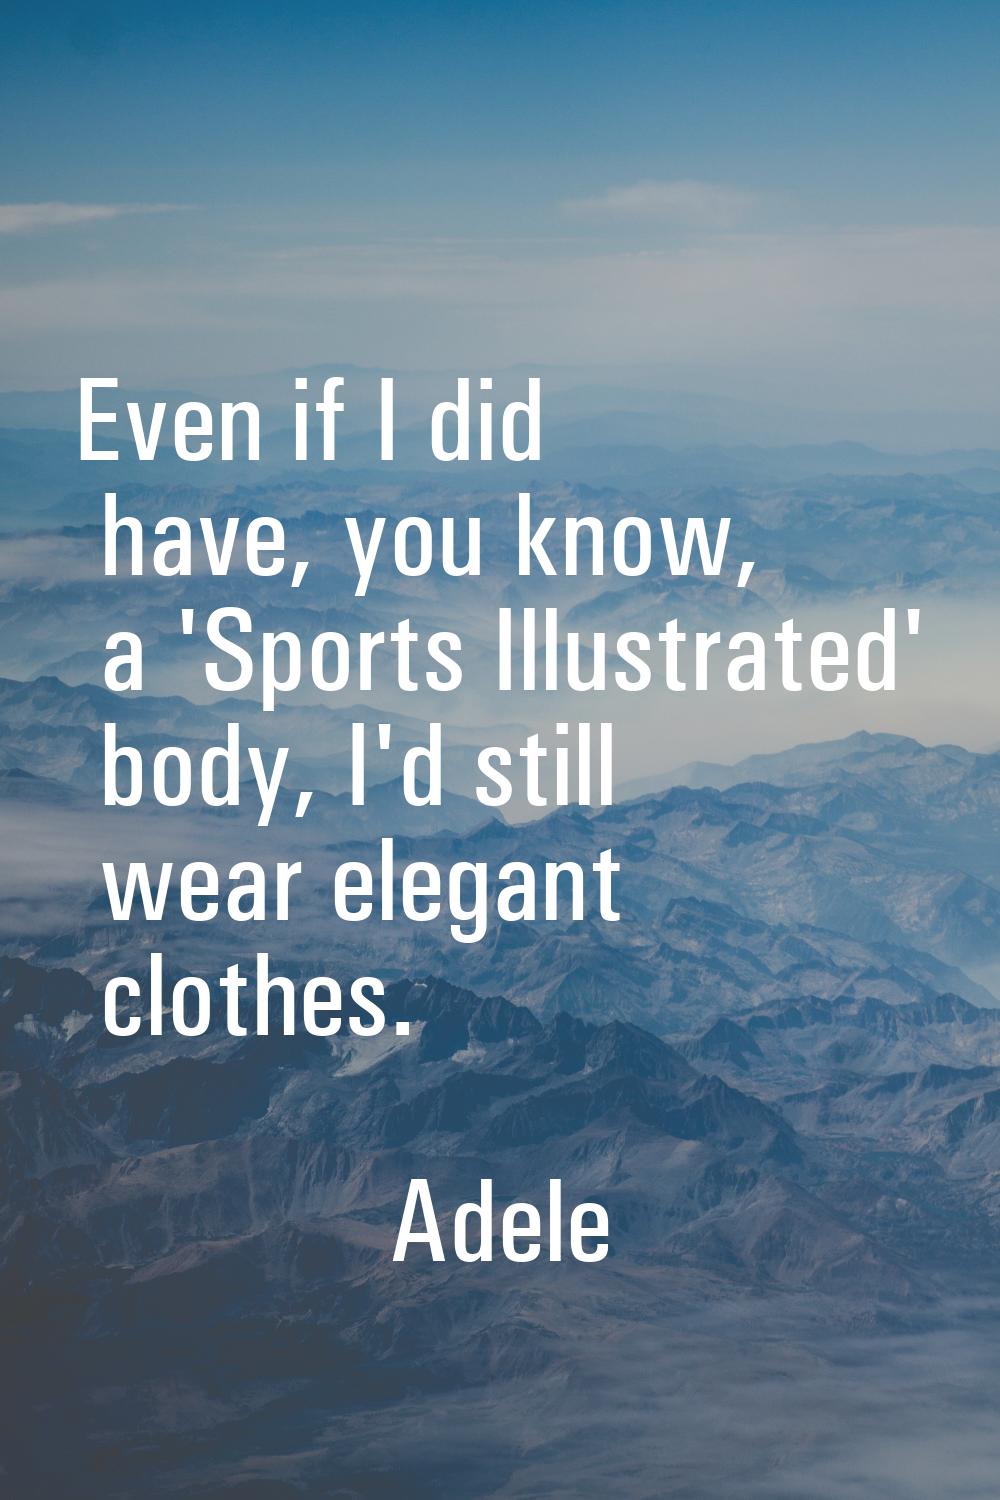 Even if I did have, you know, a 'Sports Illustrated' body, I'd still wear elegant clothes.